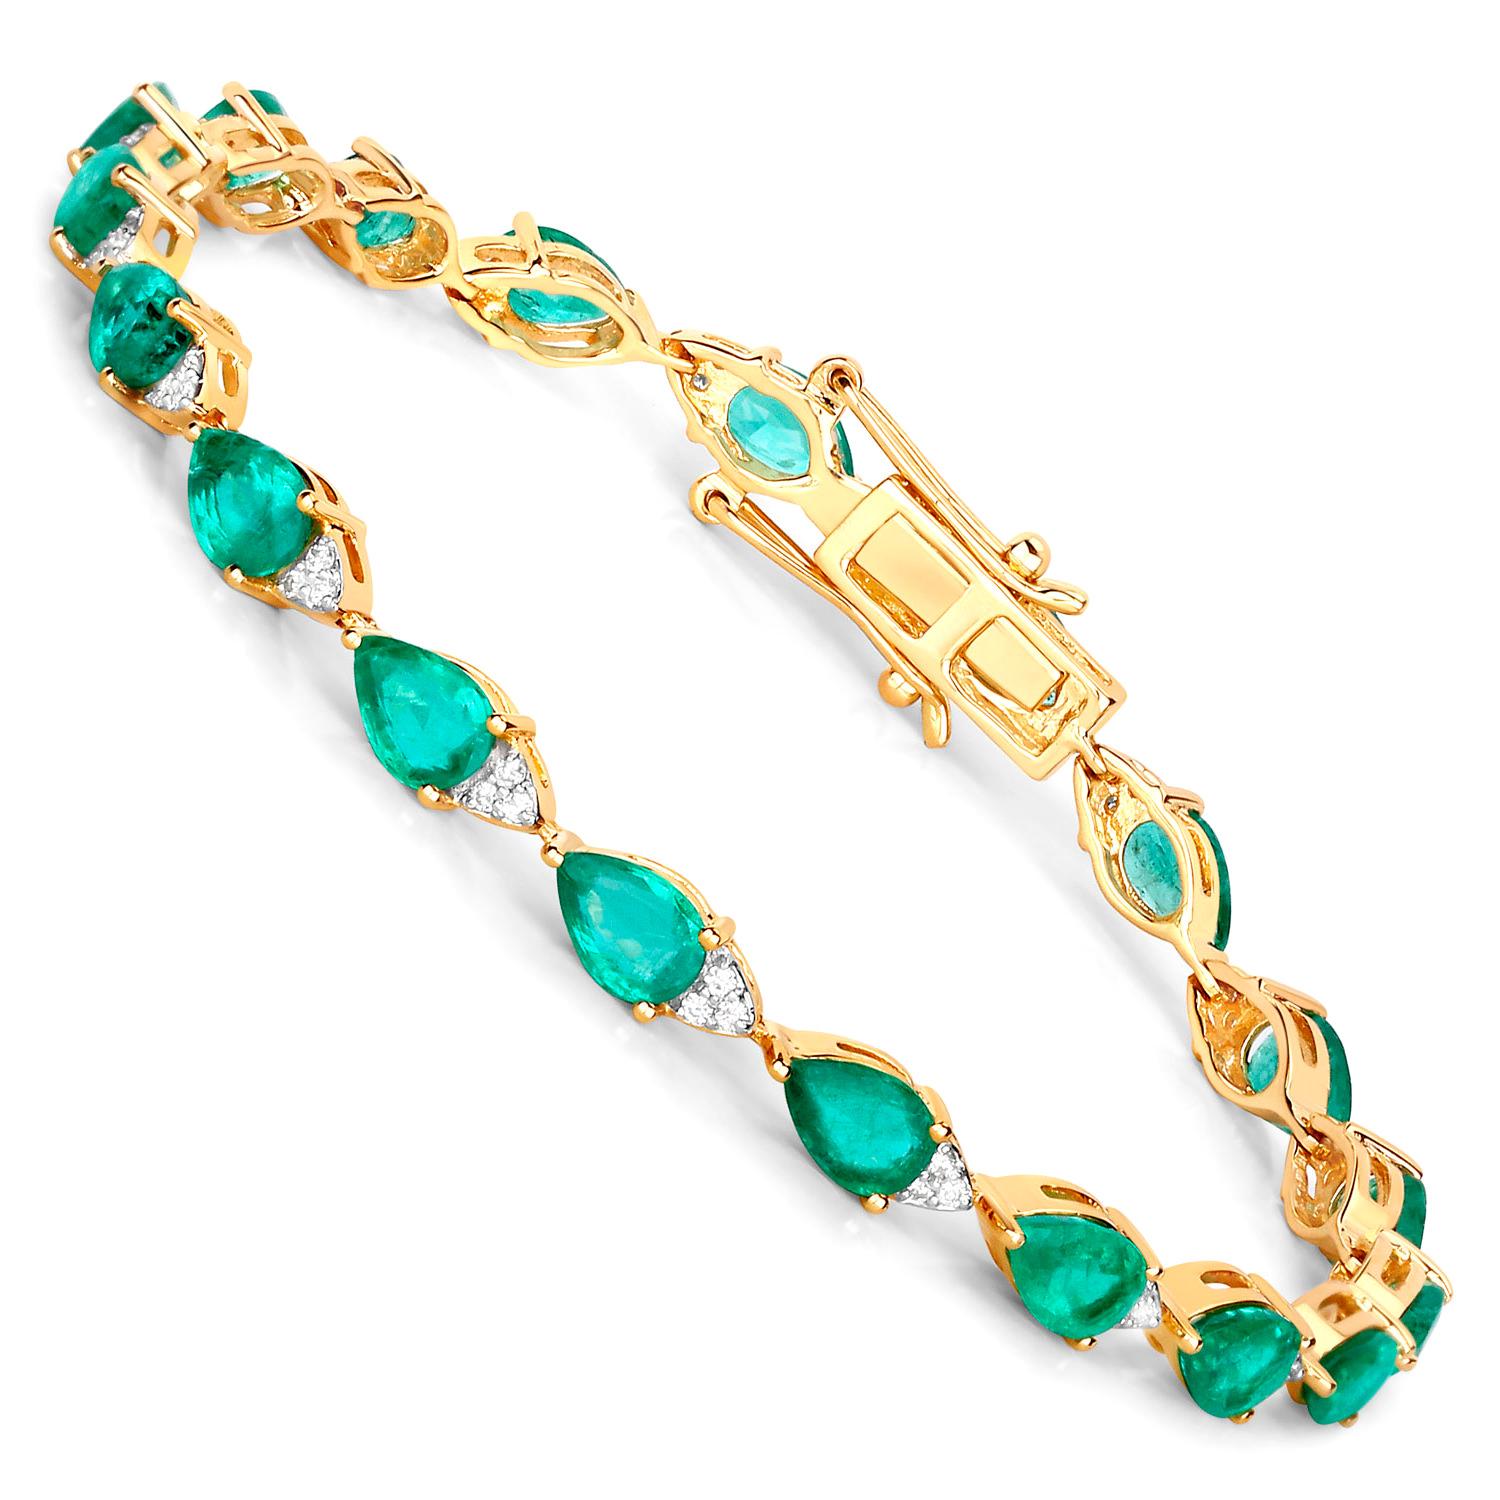 Contemporary Zambian Emerald Tennis Bracelet With Diamonds 6.91 Carats 18K Yellow Gold For Sale